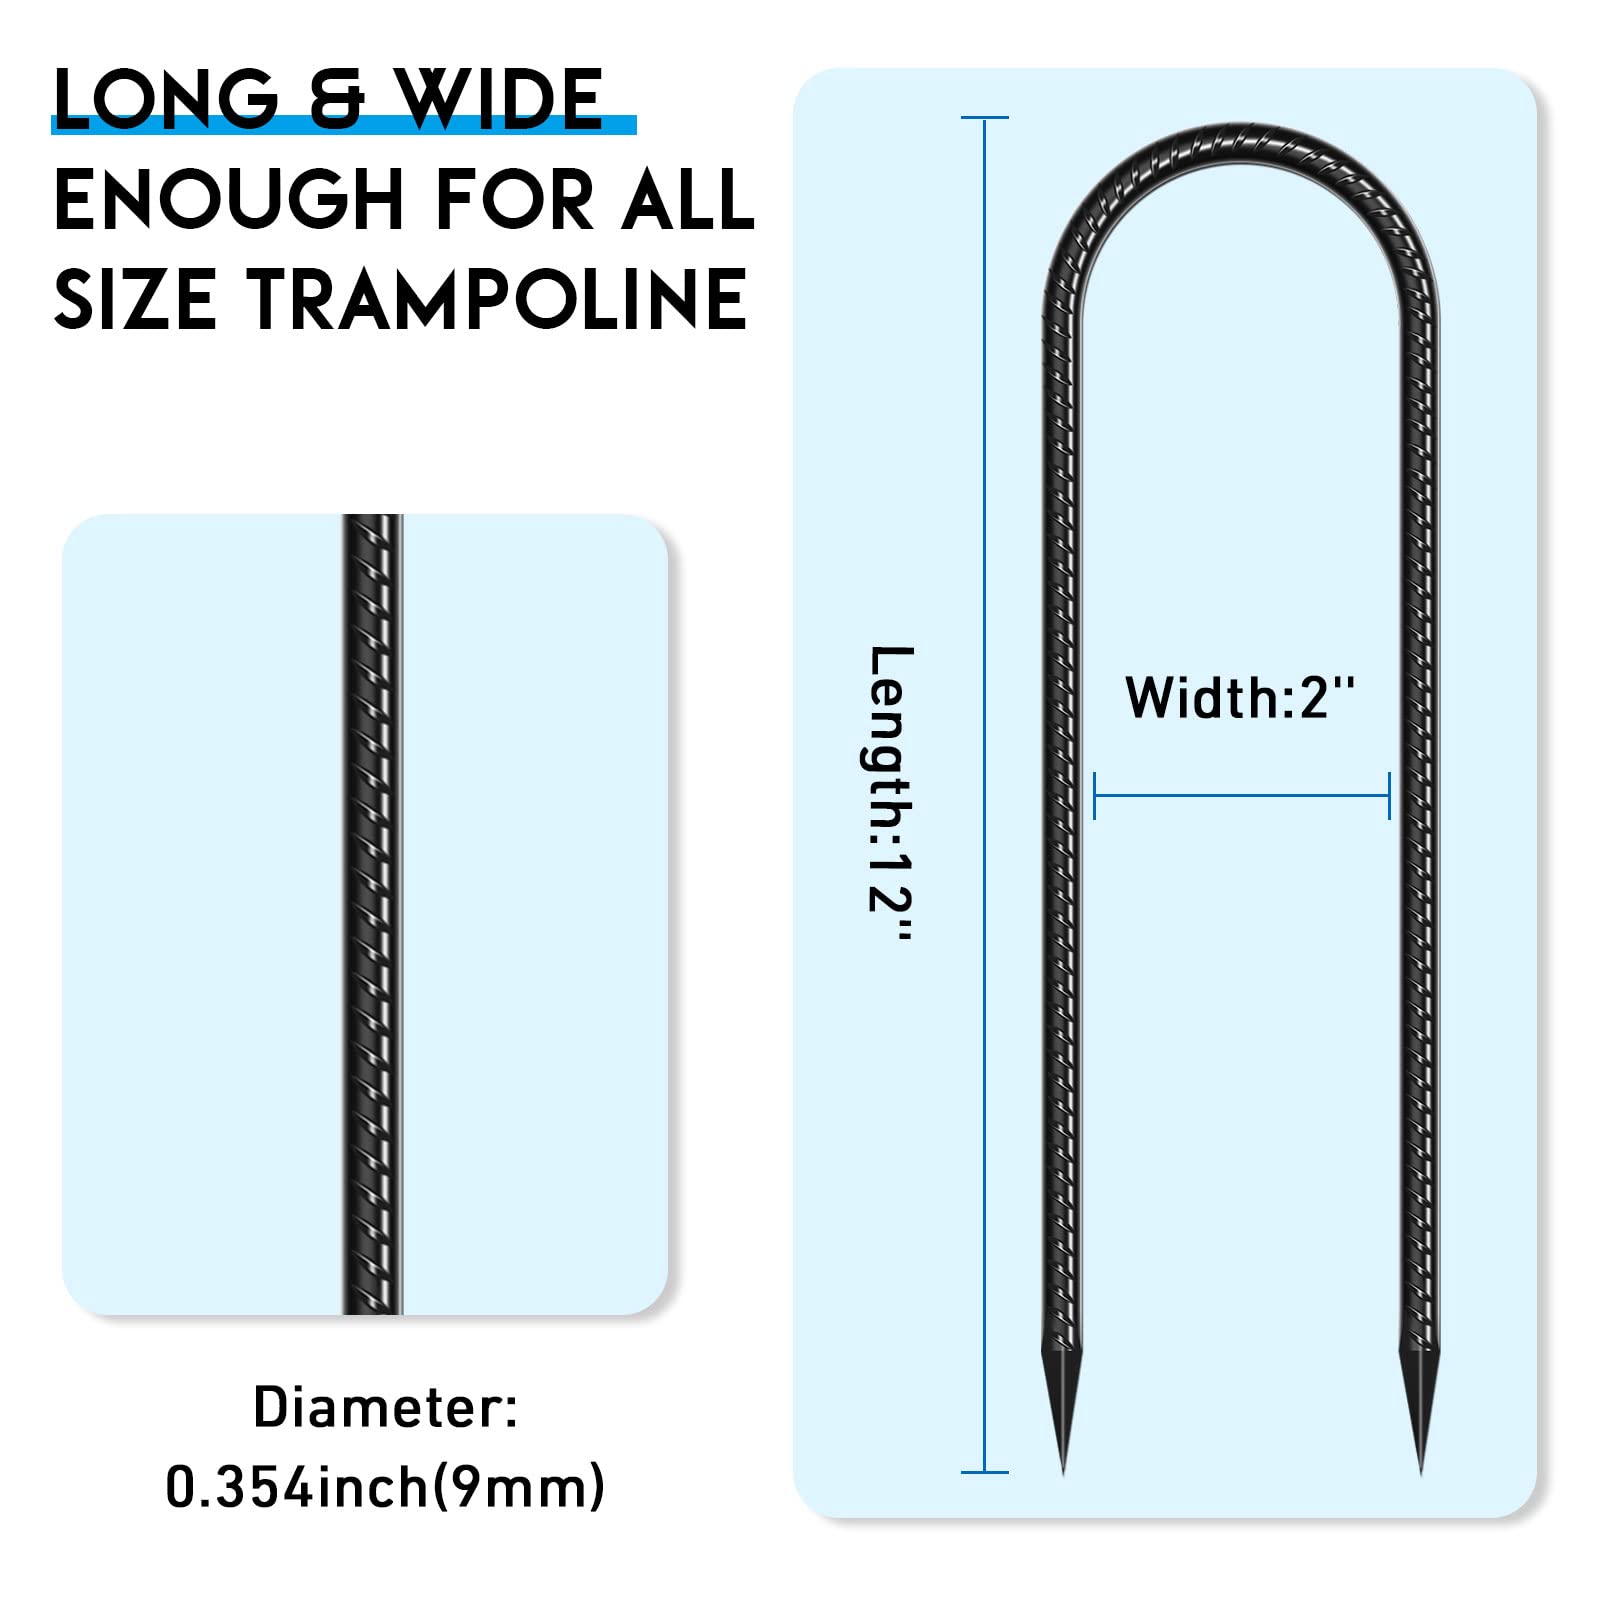 UNIPRIMEBBQ Trampoline Stakes U Shaped Anchors Heavy Duty Metal - Long Trampolines Ground Wind Stakes for Soccer Goals, Camping Tents, Garde